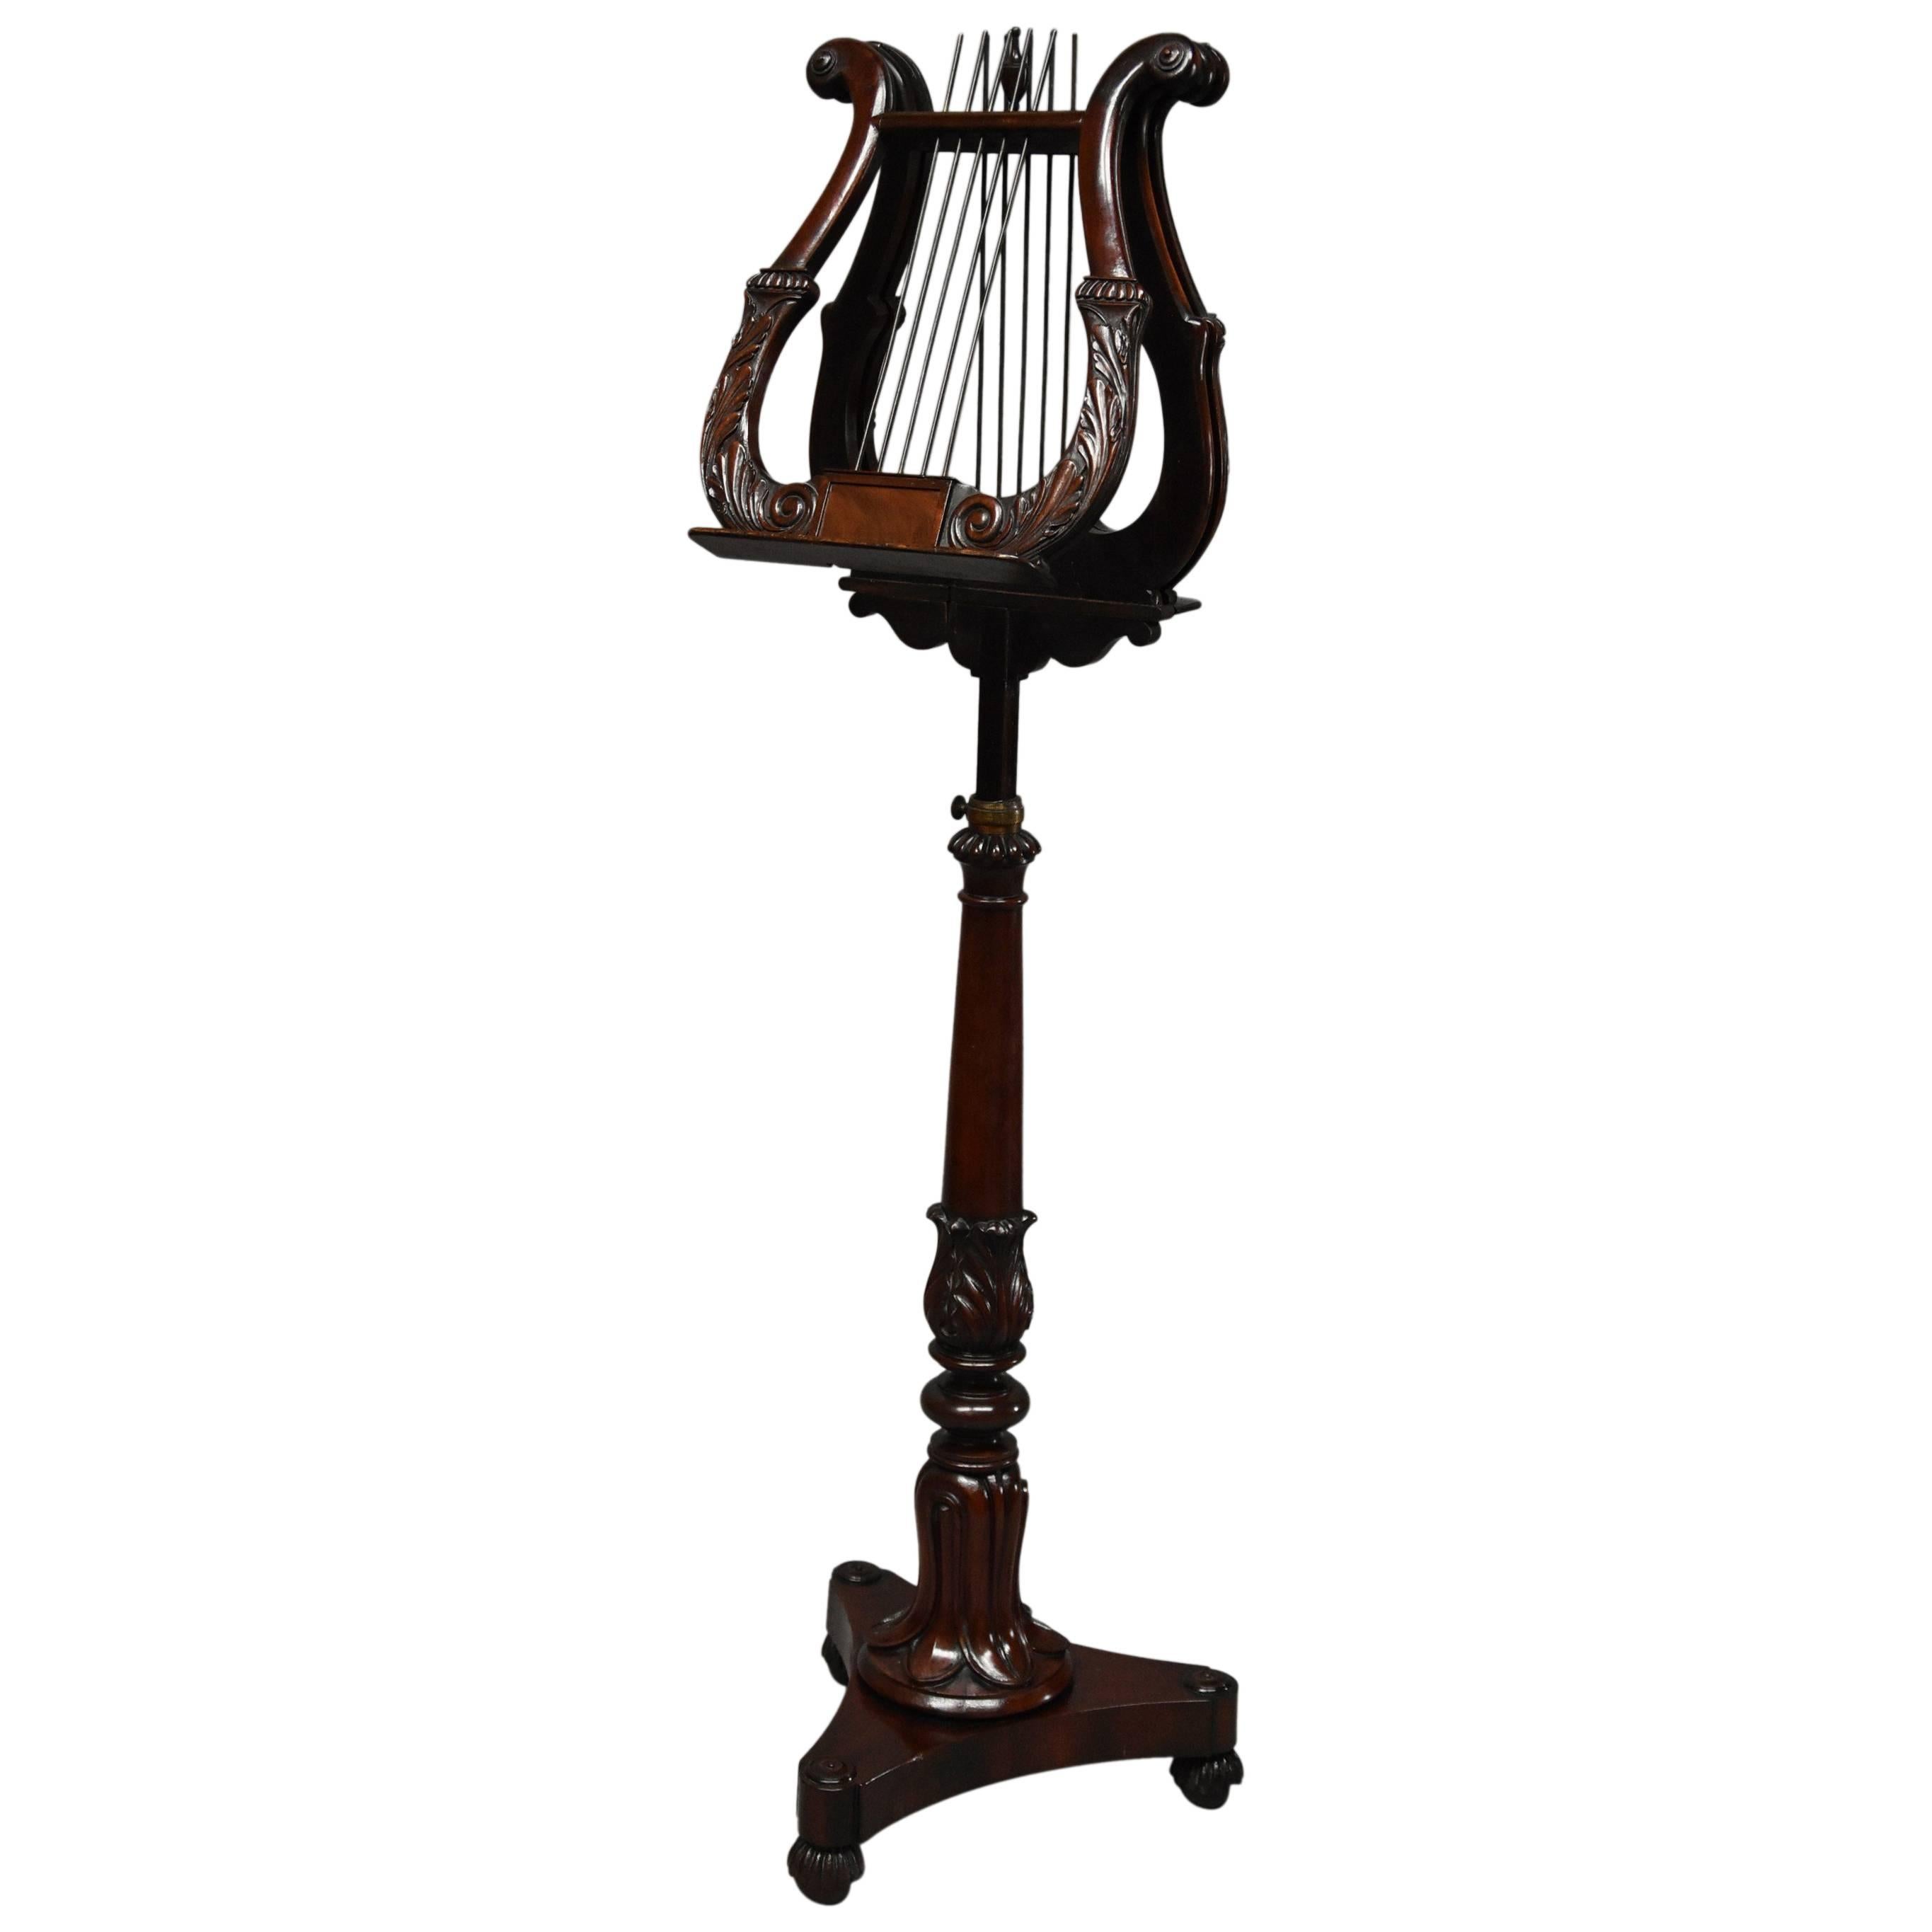 19th Century Regency Mahogany Lyre Duet Music Stand of Excellent Quality